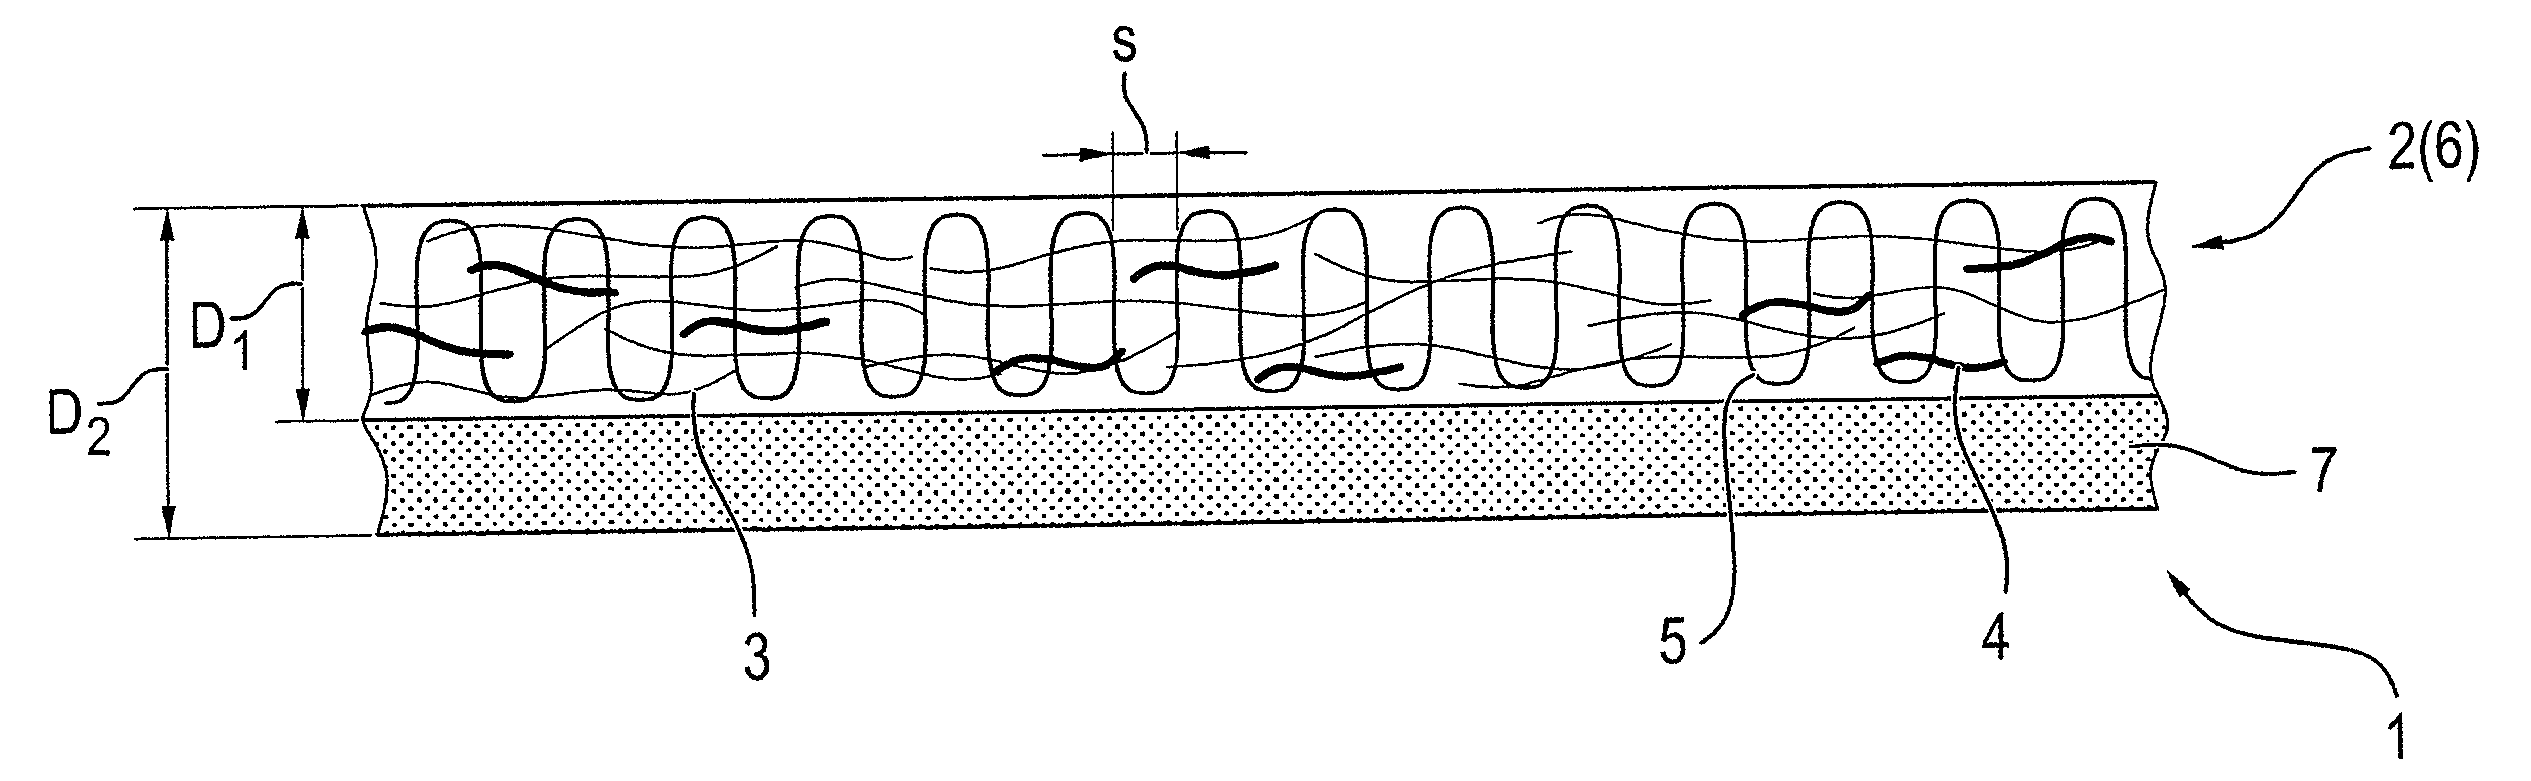 Adhesive tape having a stitch-bonded nonwoven carrier